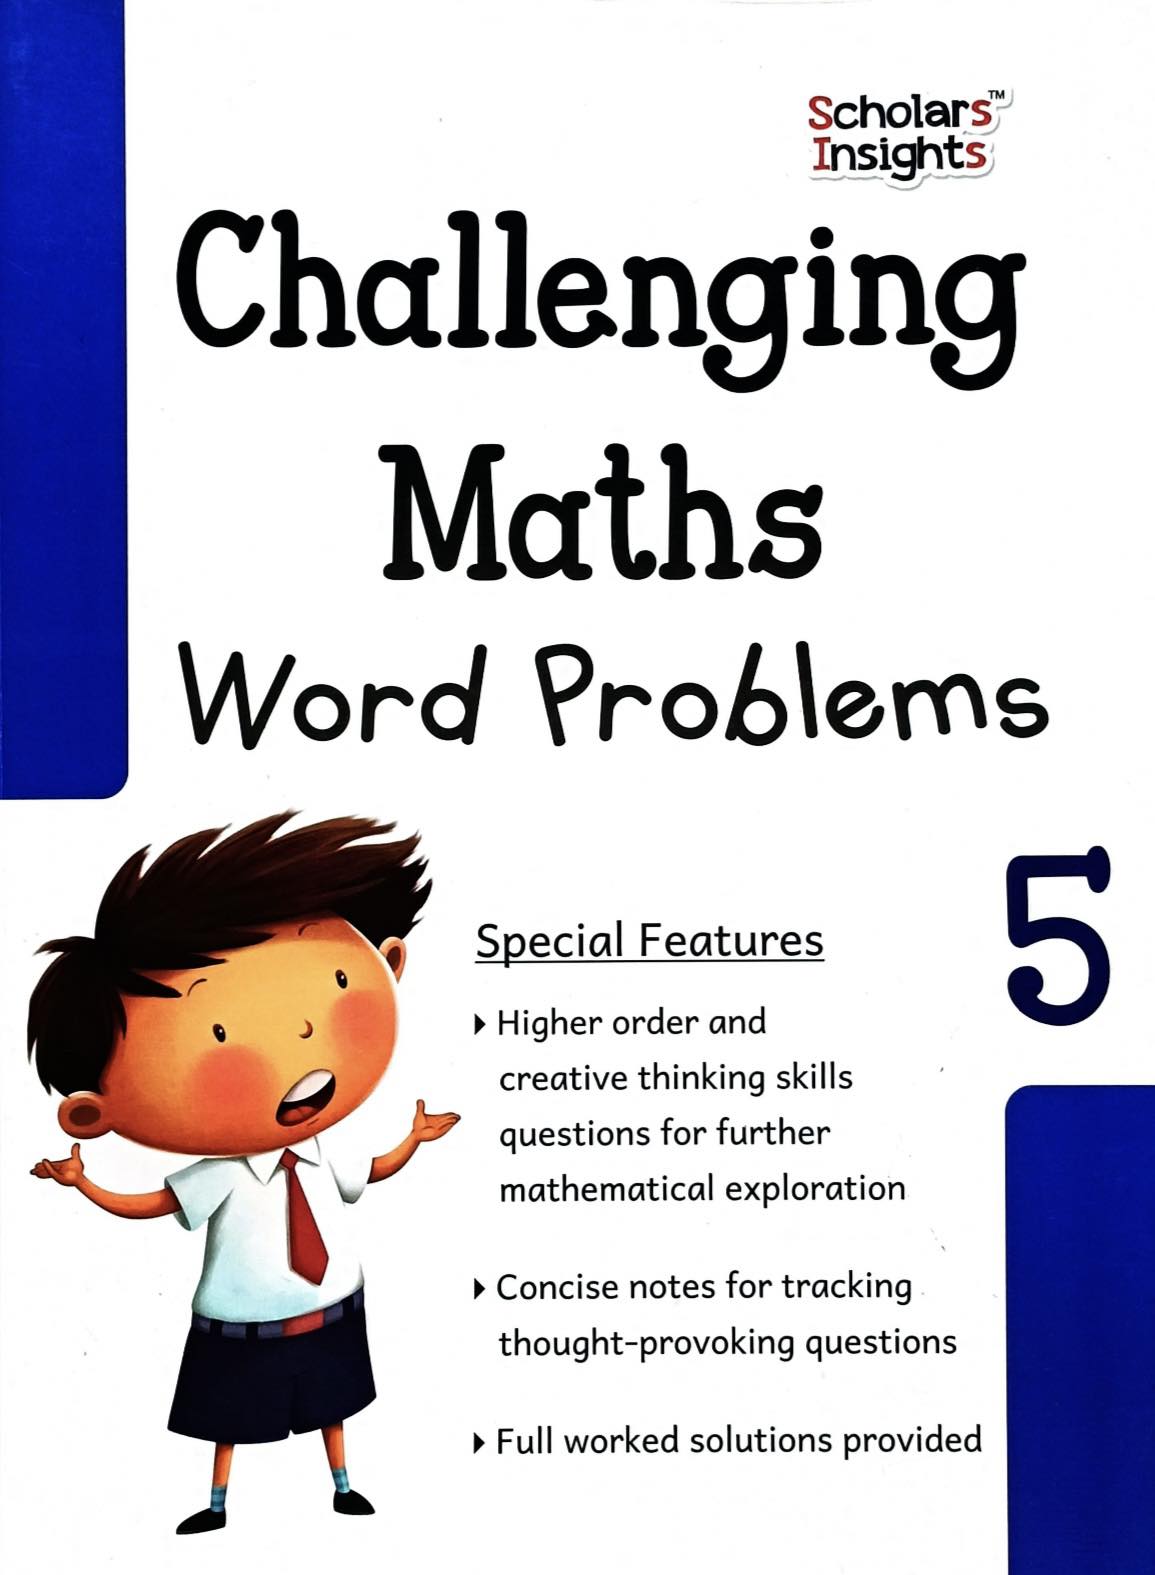 Challenging Maths Word Problems for Primary Levels